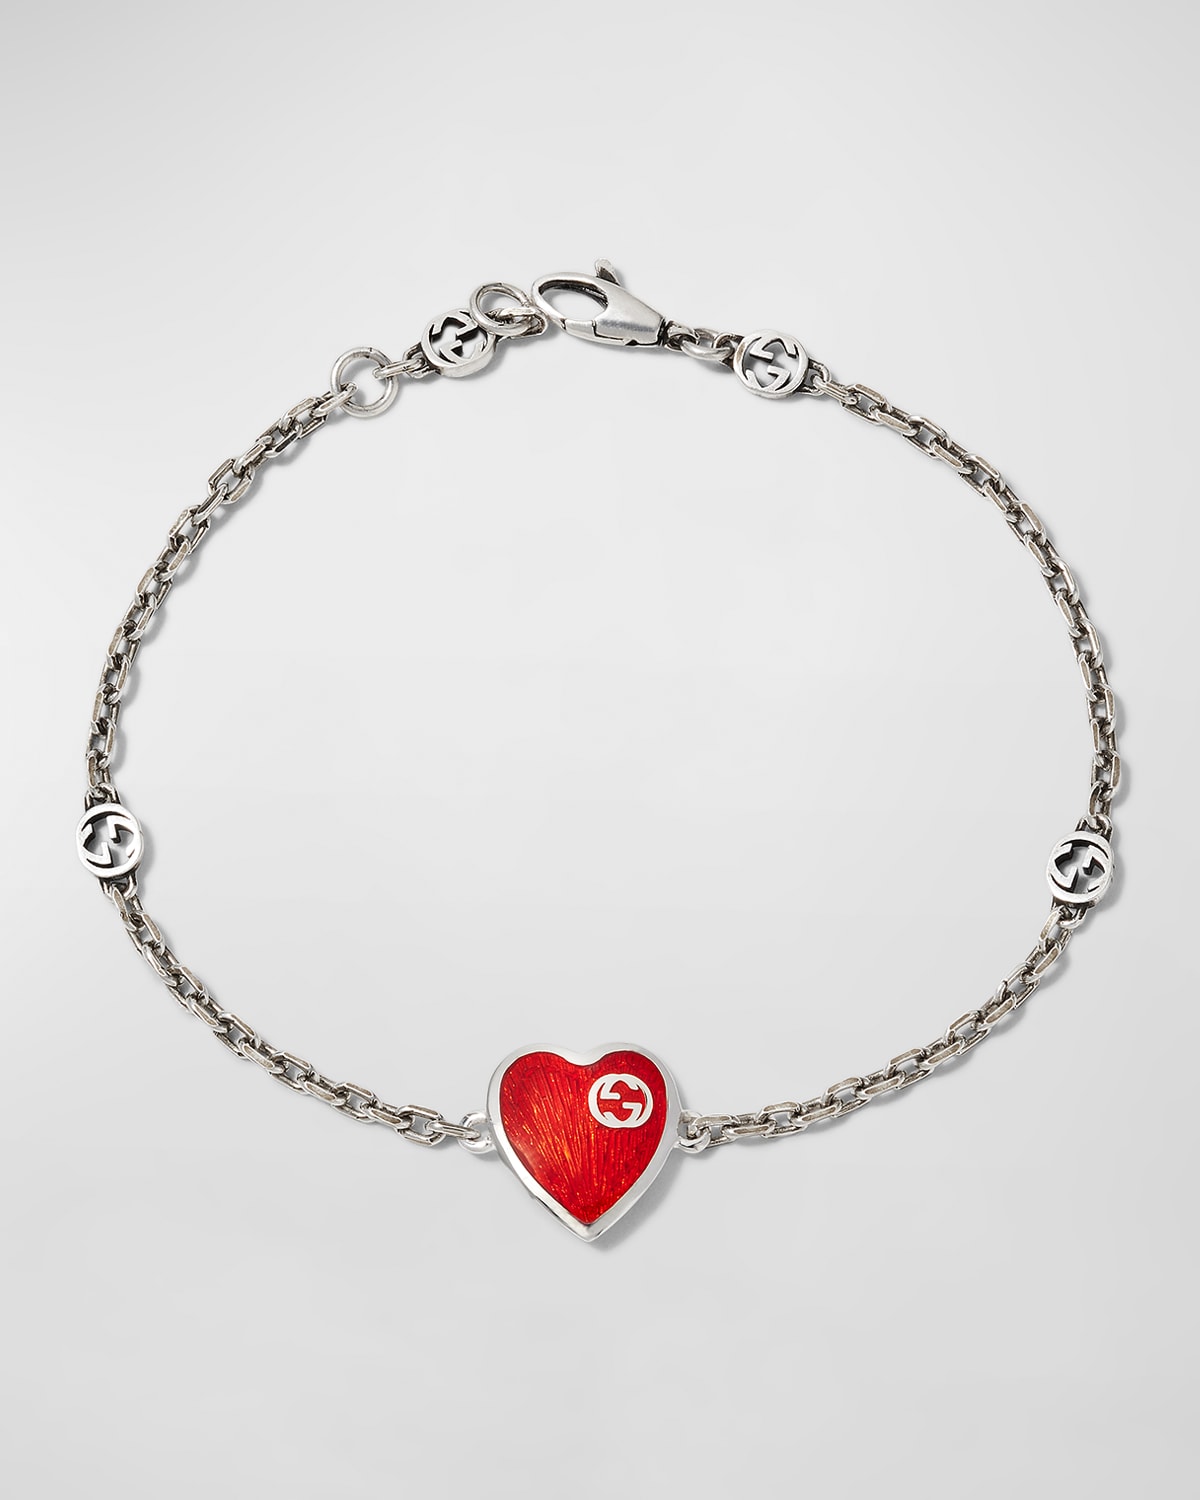 GUCCI STERLING SILVER HEART BRACELET WITH INTERLOCKING G